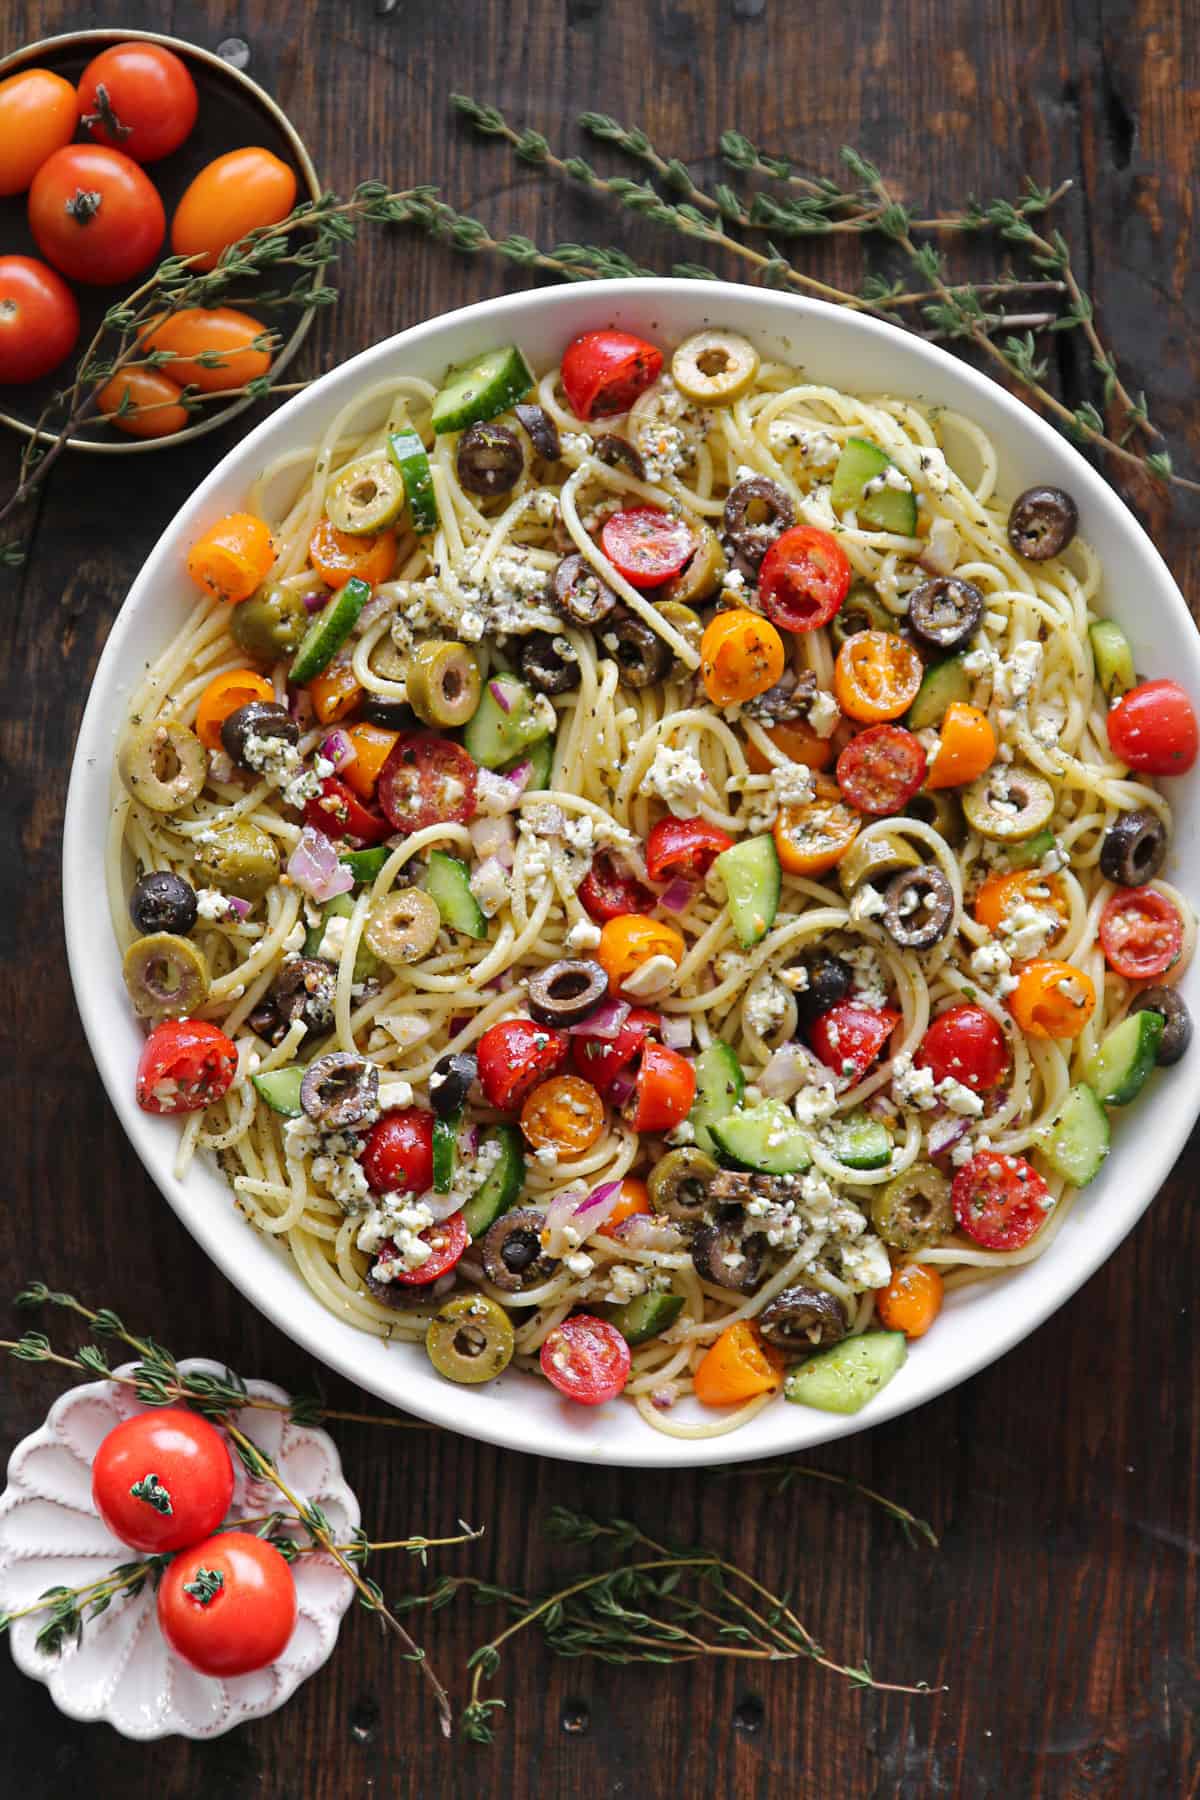 Spaghetti Salad with cherry (or grape) tomatoes, cucumbers, black olives, green olives, red onion, and feta cheese - in a white bowl.